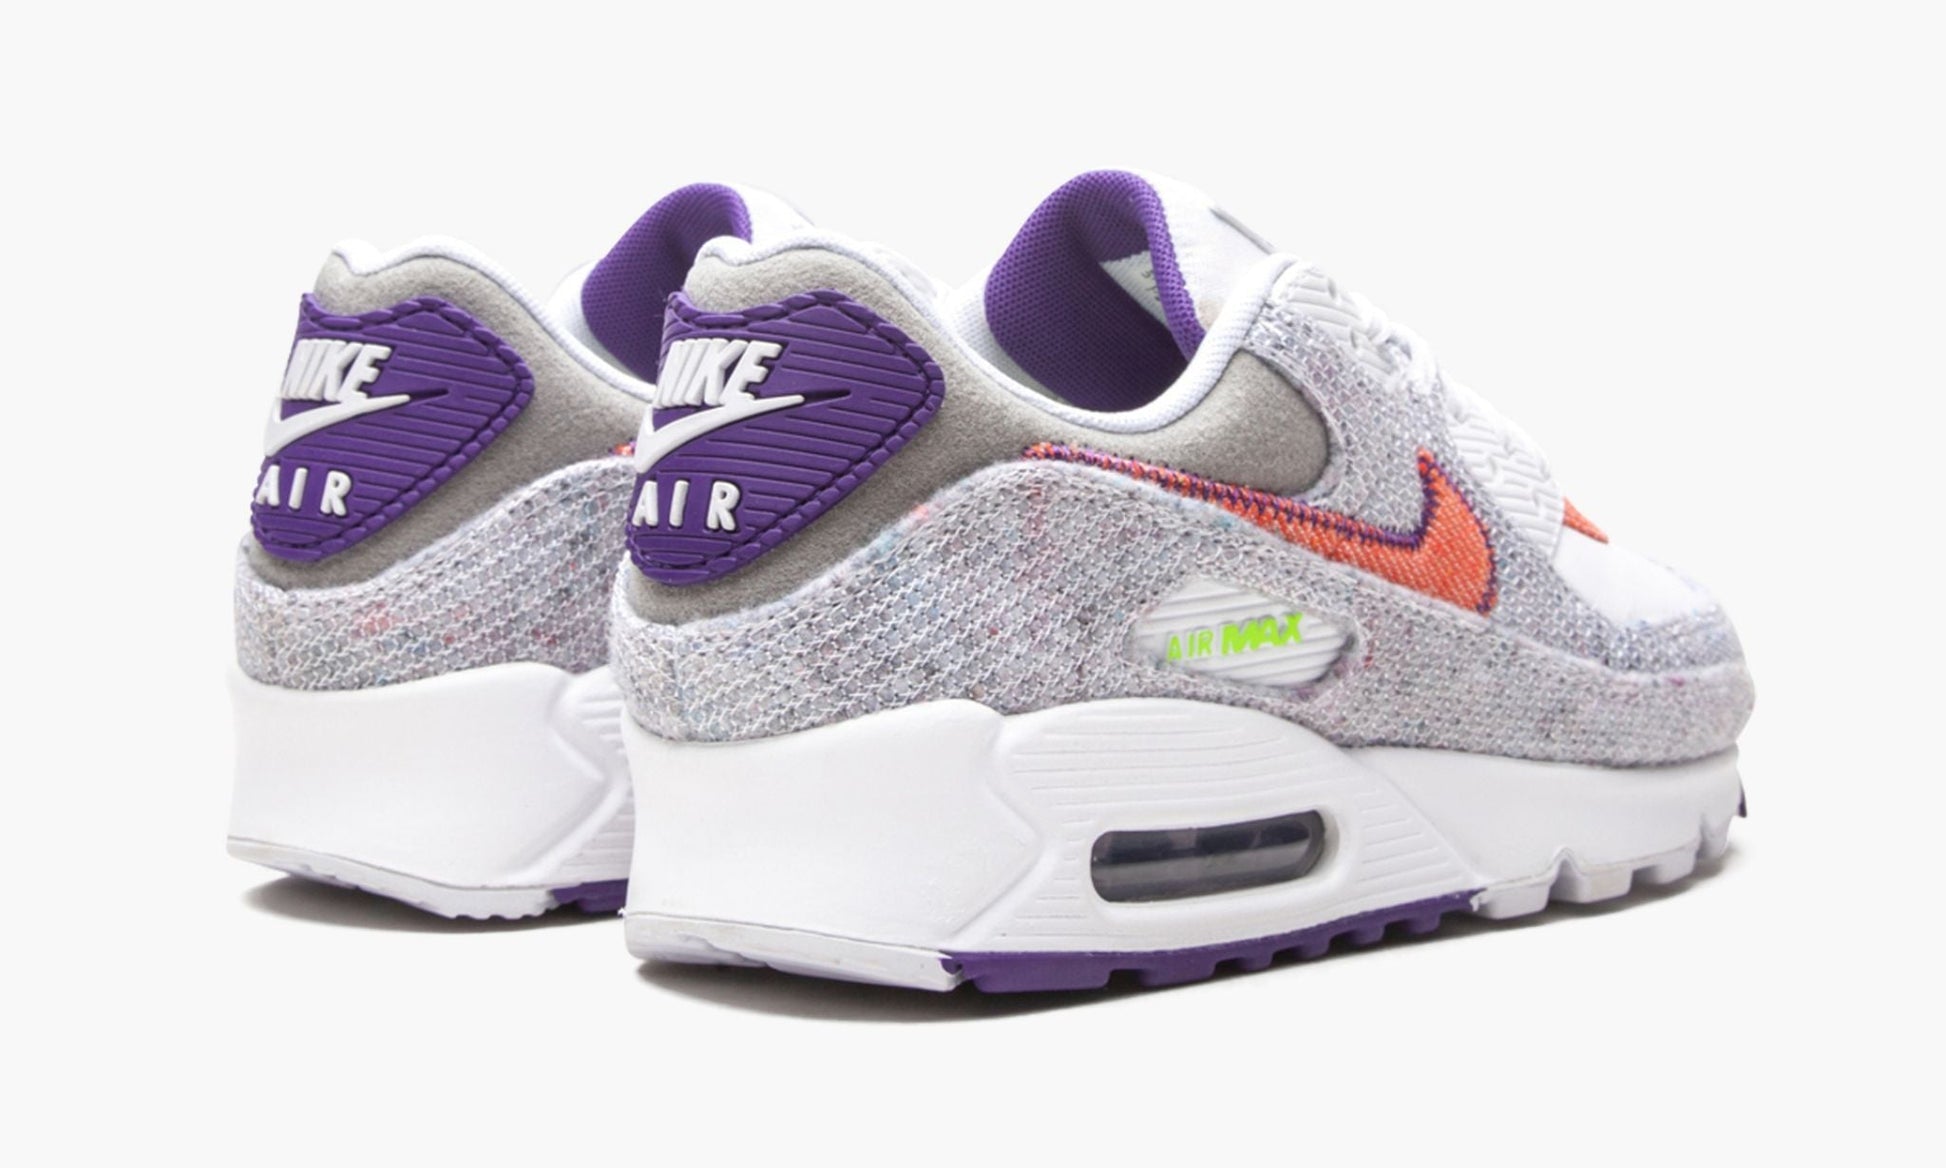 Air Max 90 "Recycled Jerseys Pack"